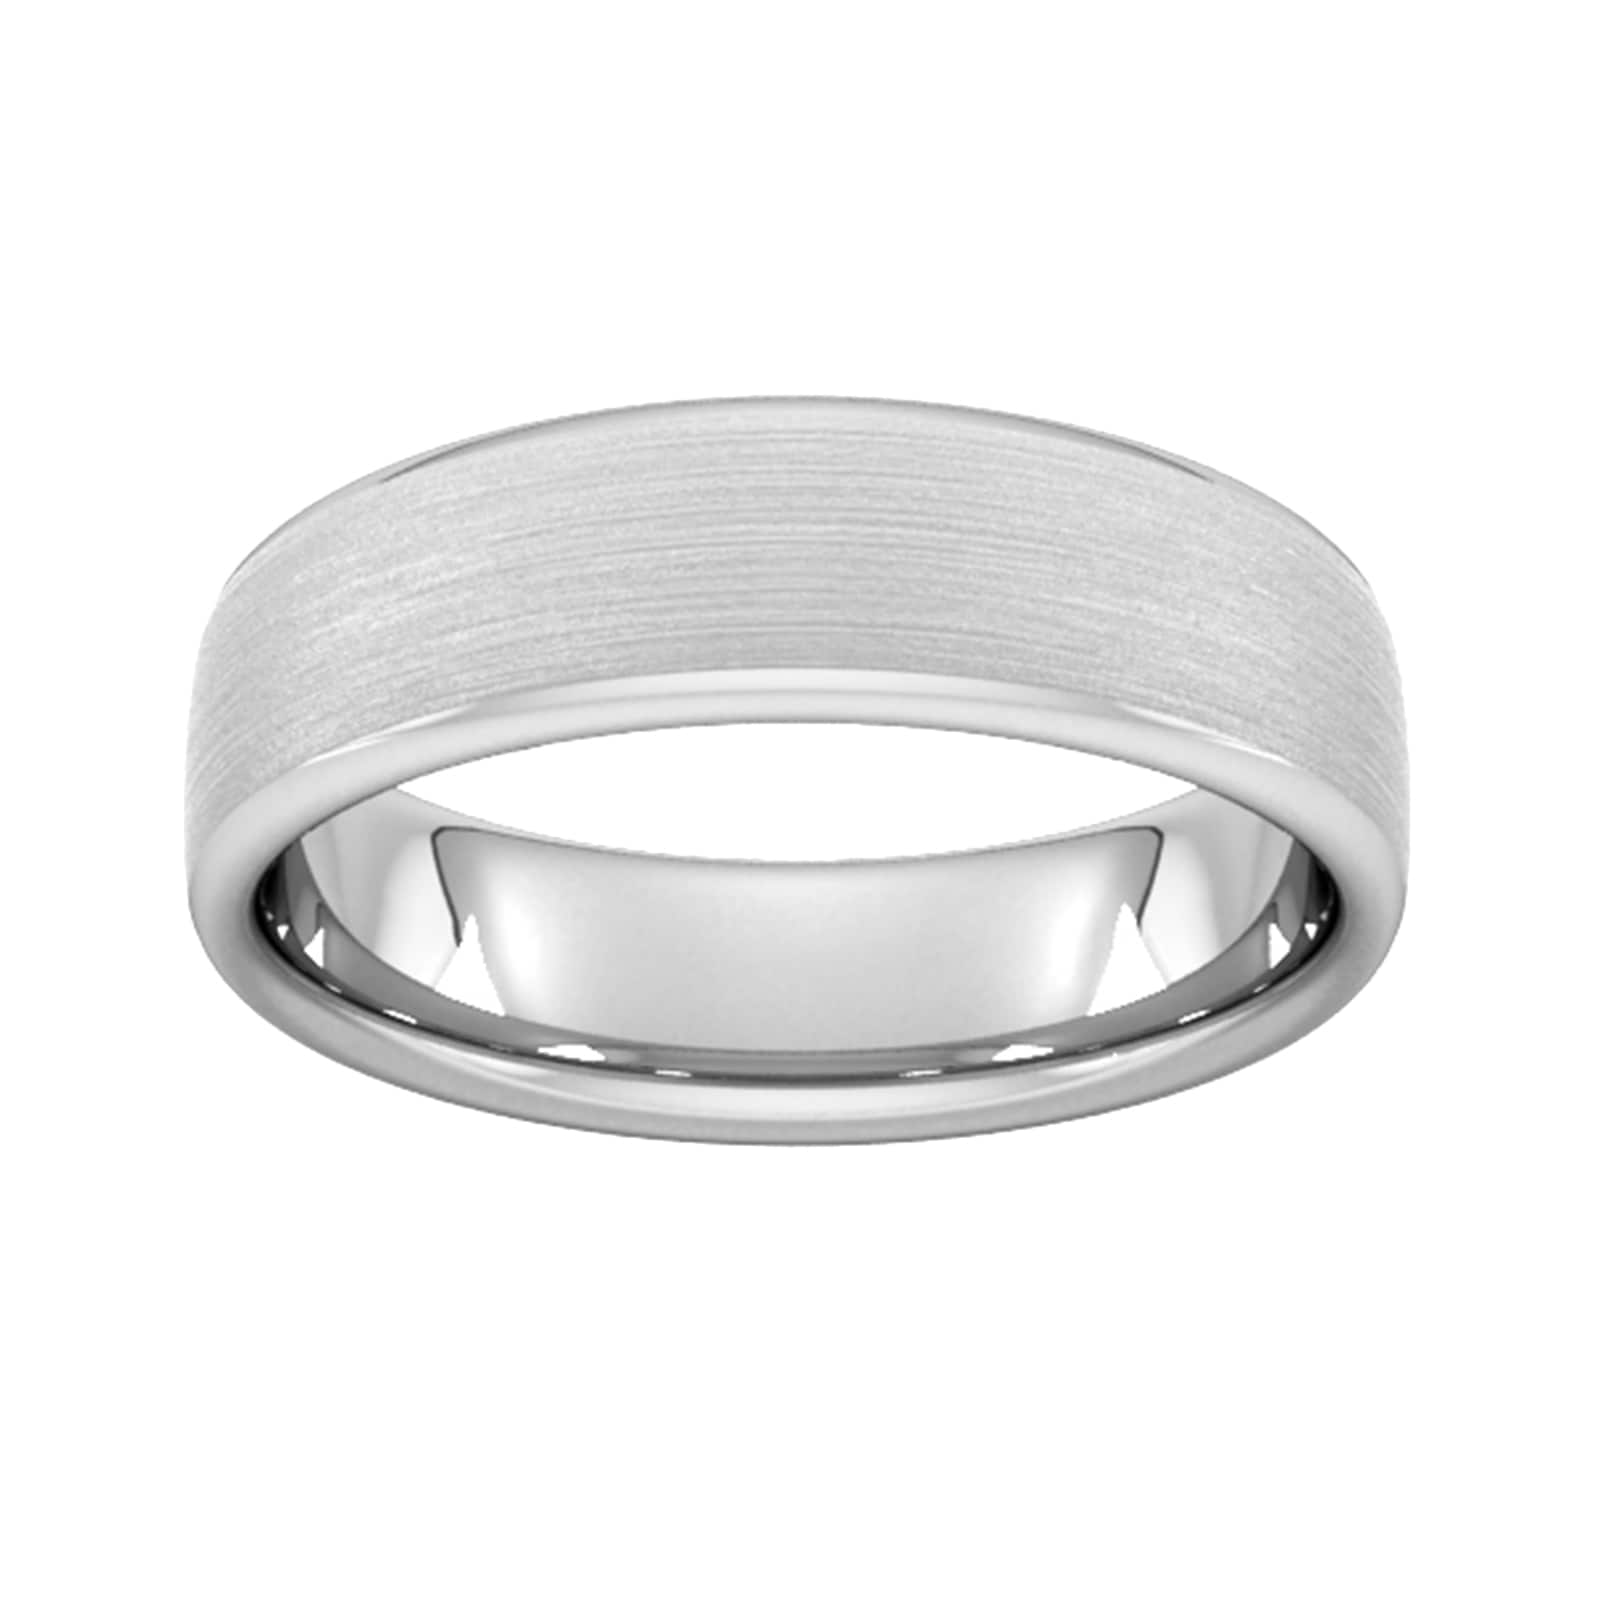 6mm Traditional Court Standard Matt Finished Wedding Ring In 9 Carat White Gold - Ring Size H